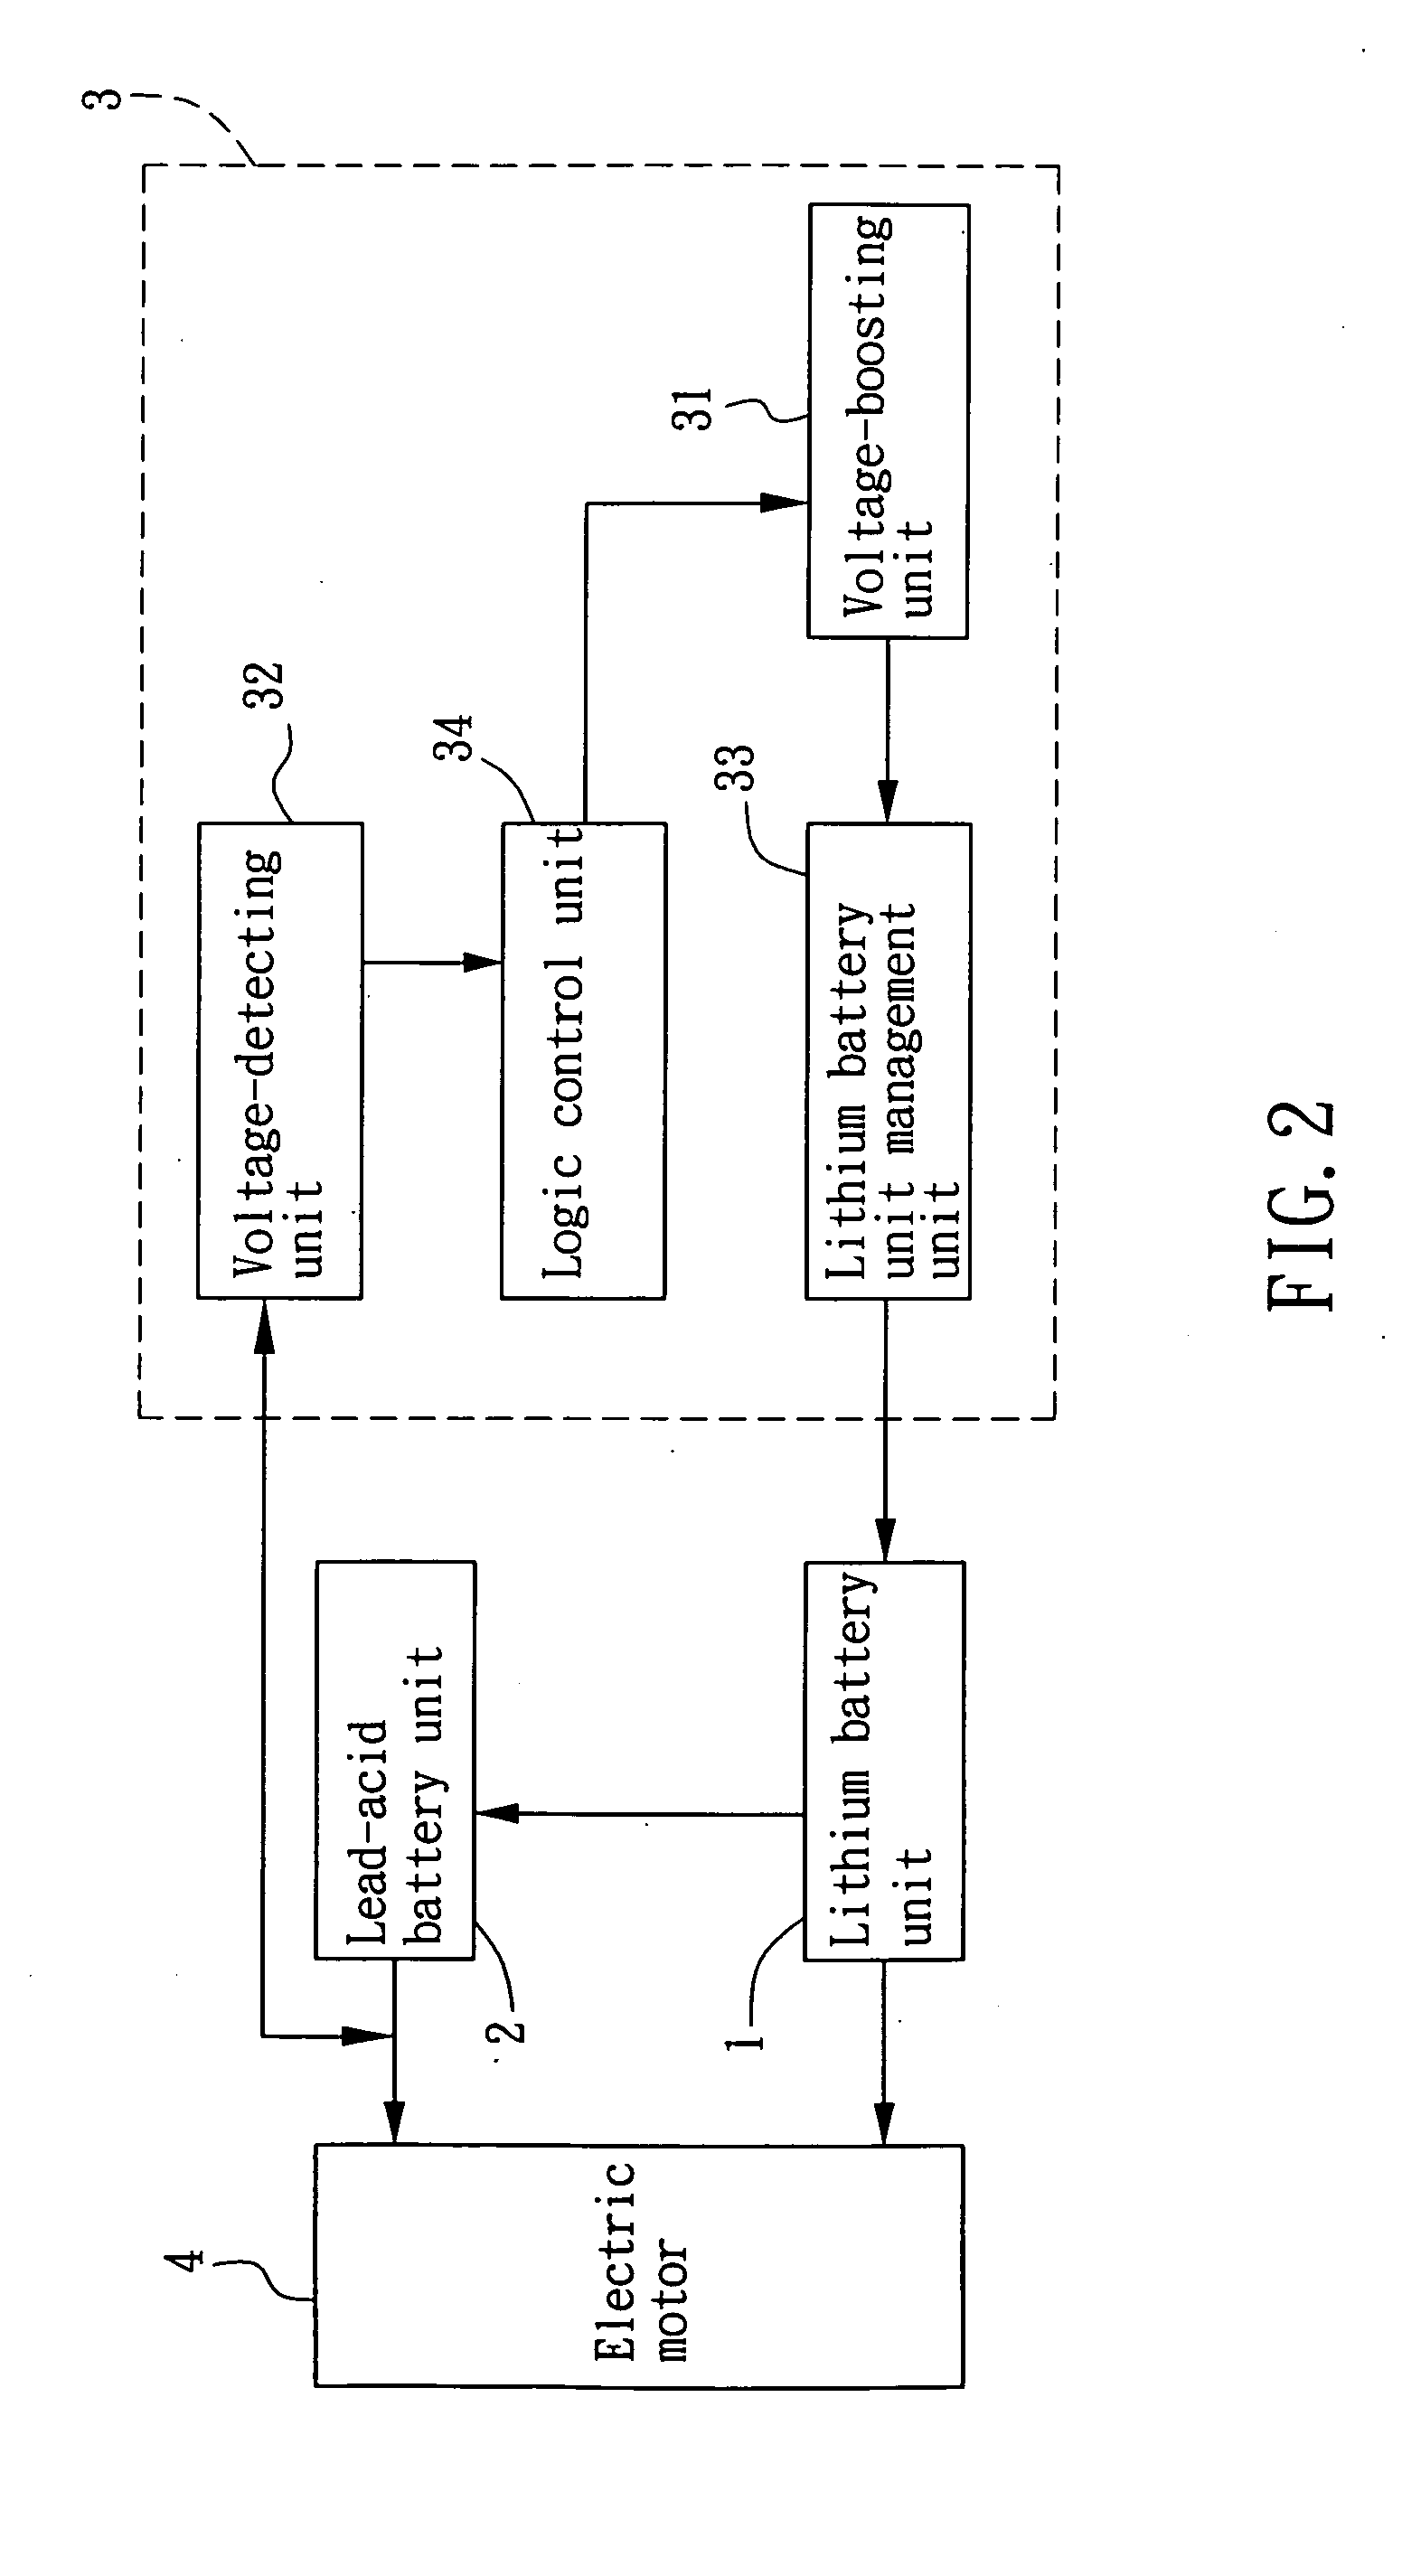 Compound battery device having lithium battery and lead-acid battery